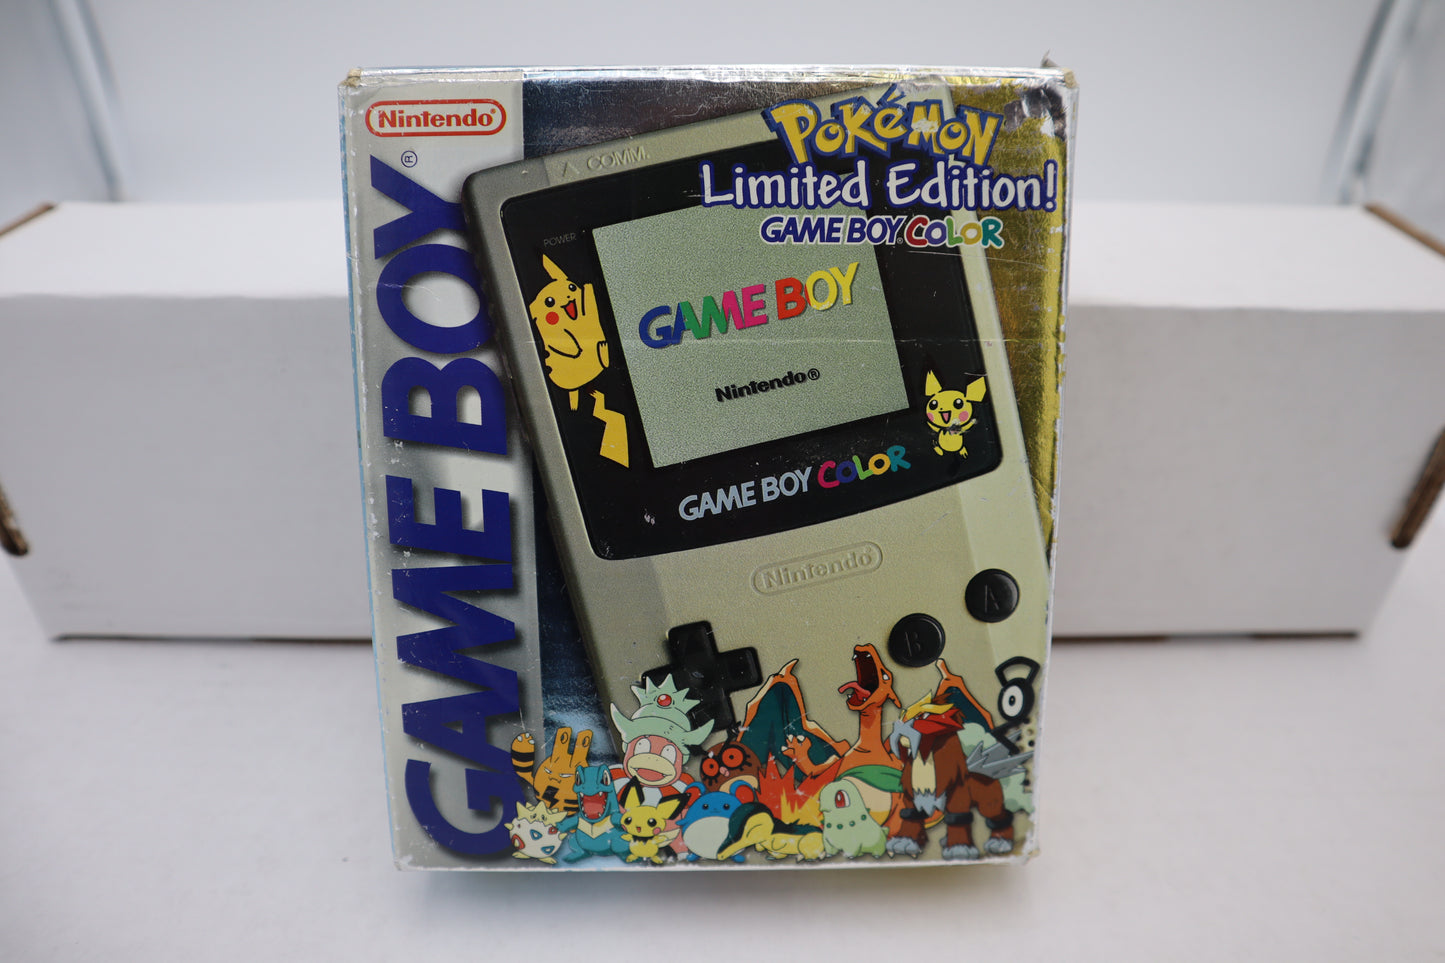 Pokemon Gold and Silver Special Edition Gameboy Color - GameBoy Color (6895541944375)